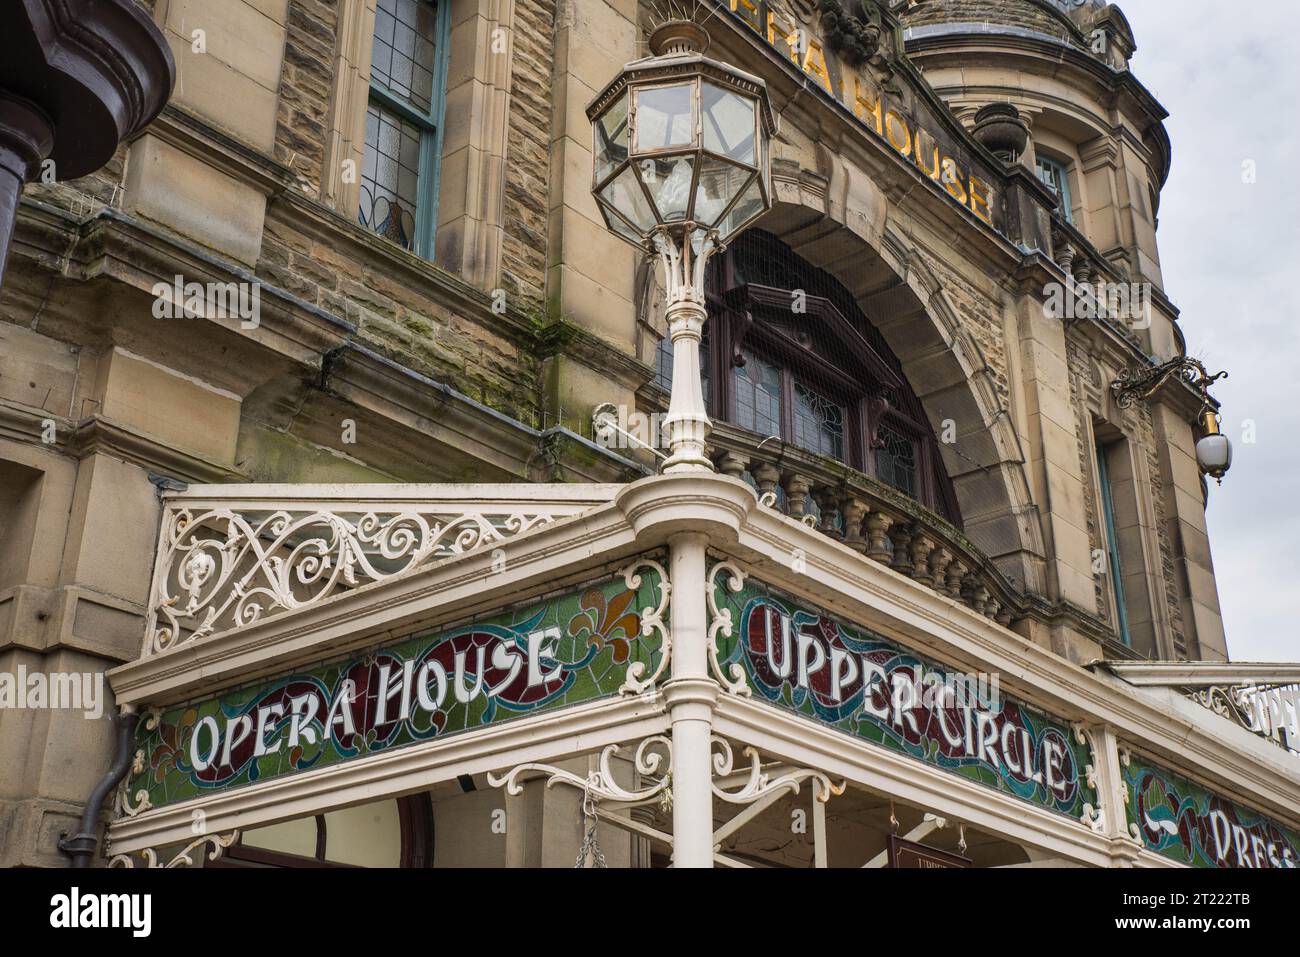 The Edwardian cast iron and coloured glass canopy of the Opera House at Buxton, Derbyshire, England Stock Photo